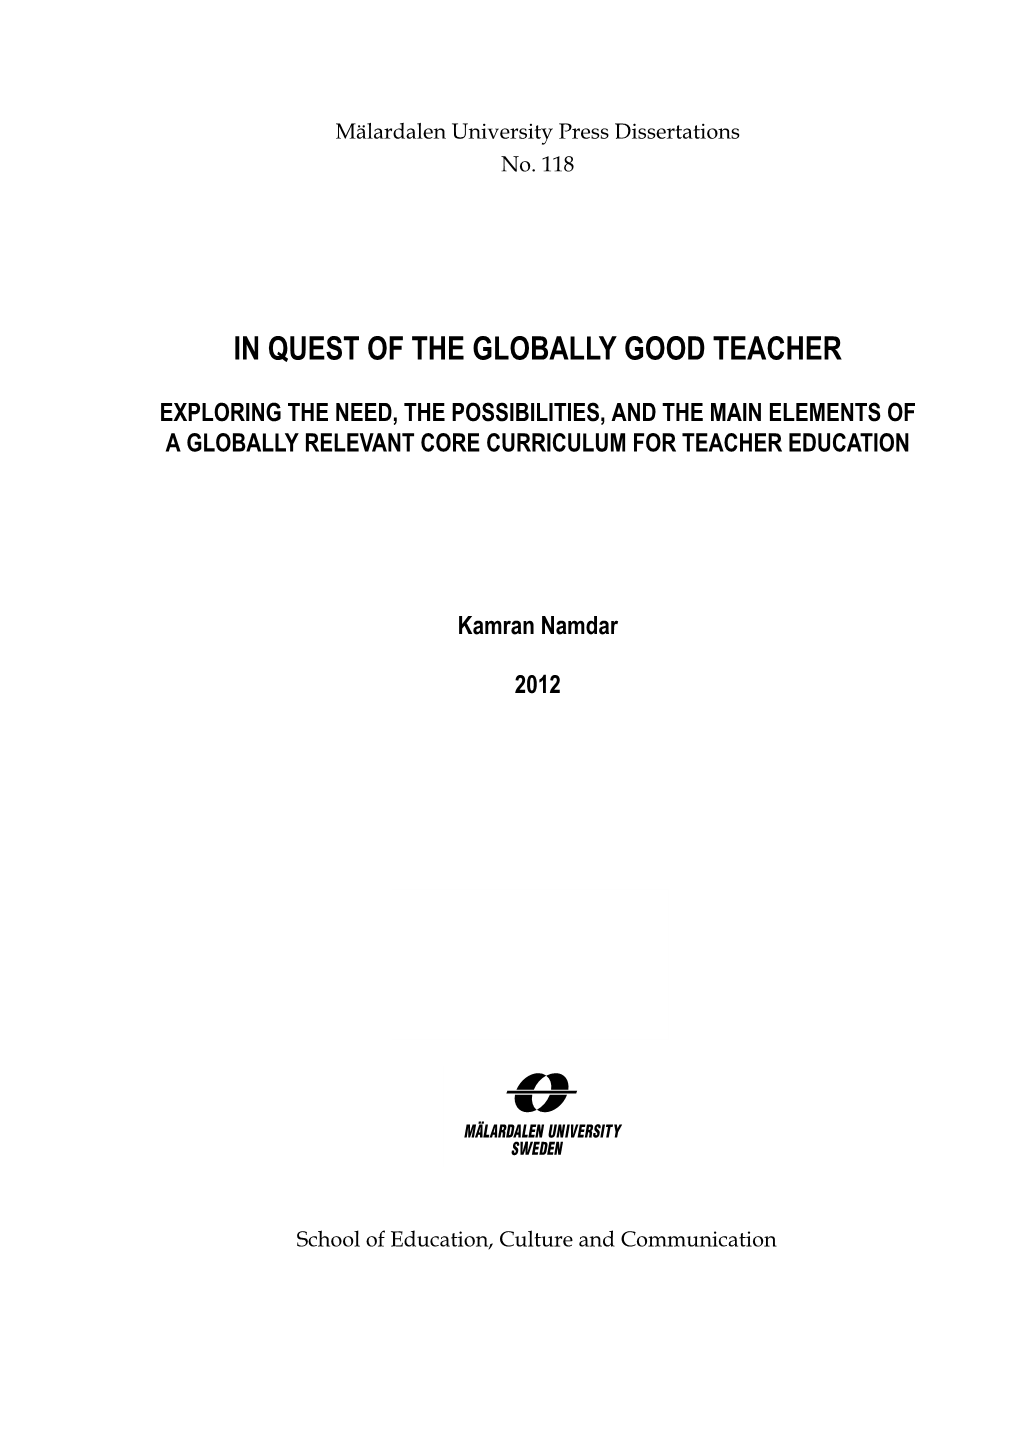 In Quest of the Globally Good Teacher